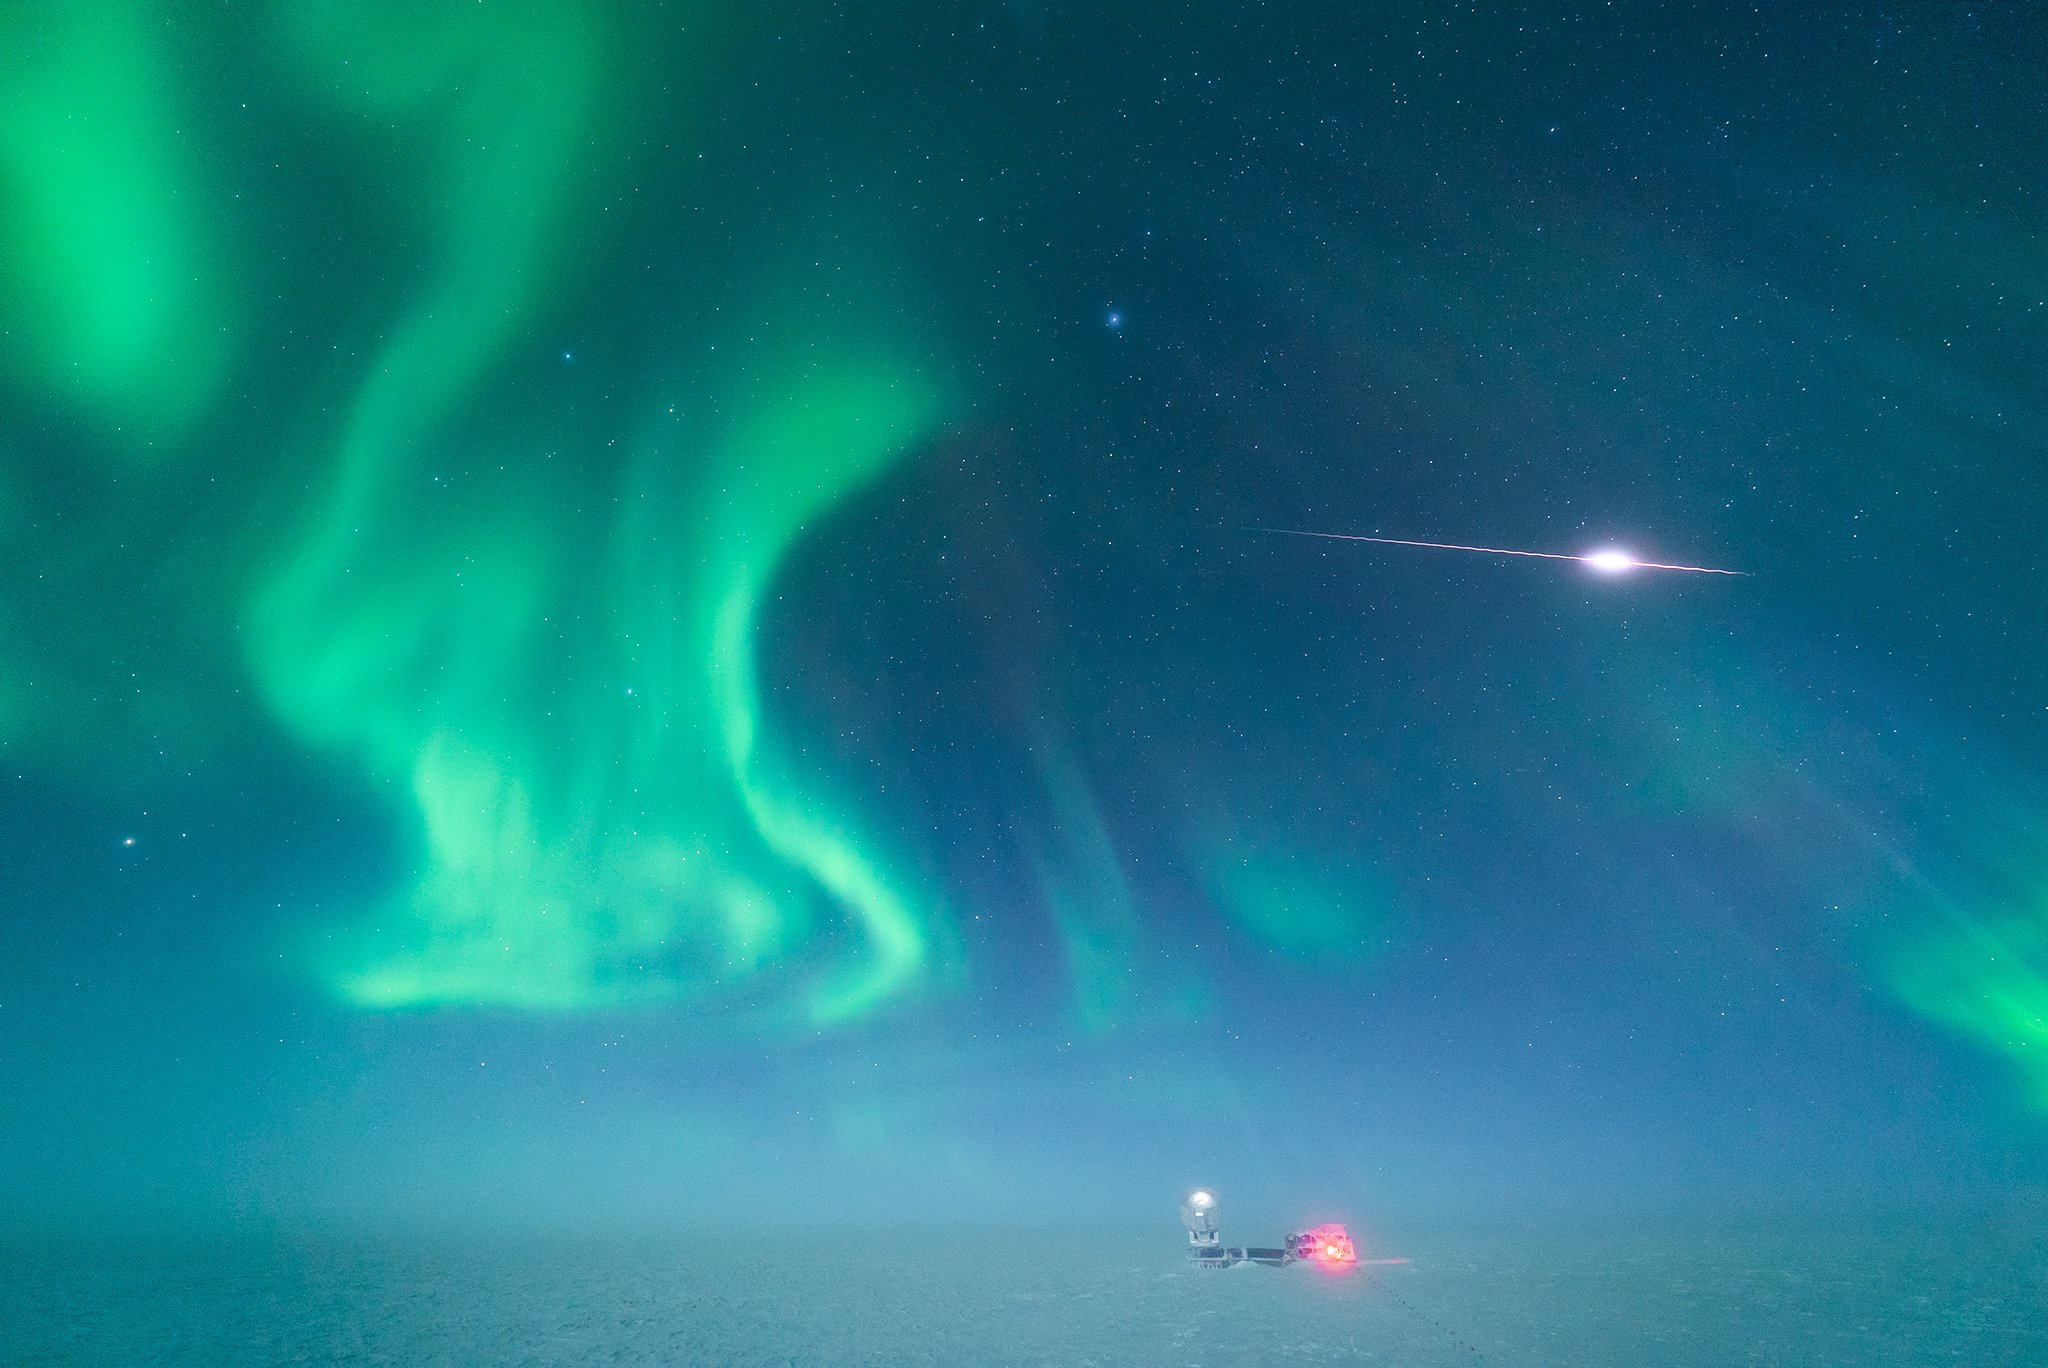 A bright meteor slicing the star-studded sky above the South Pole Telescope amid the shimmering lights of aurora australis.